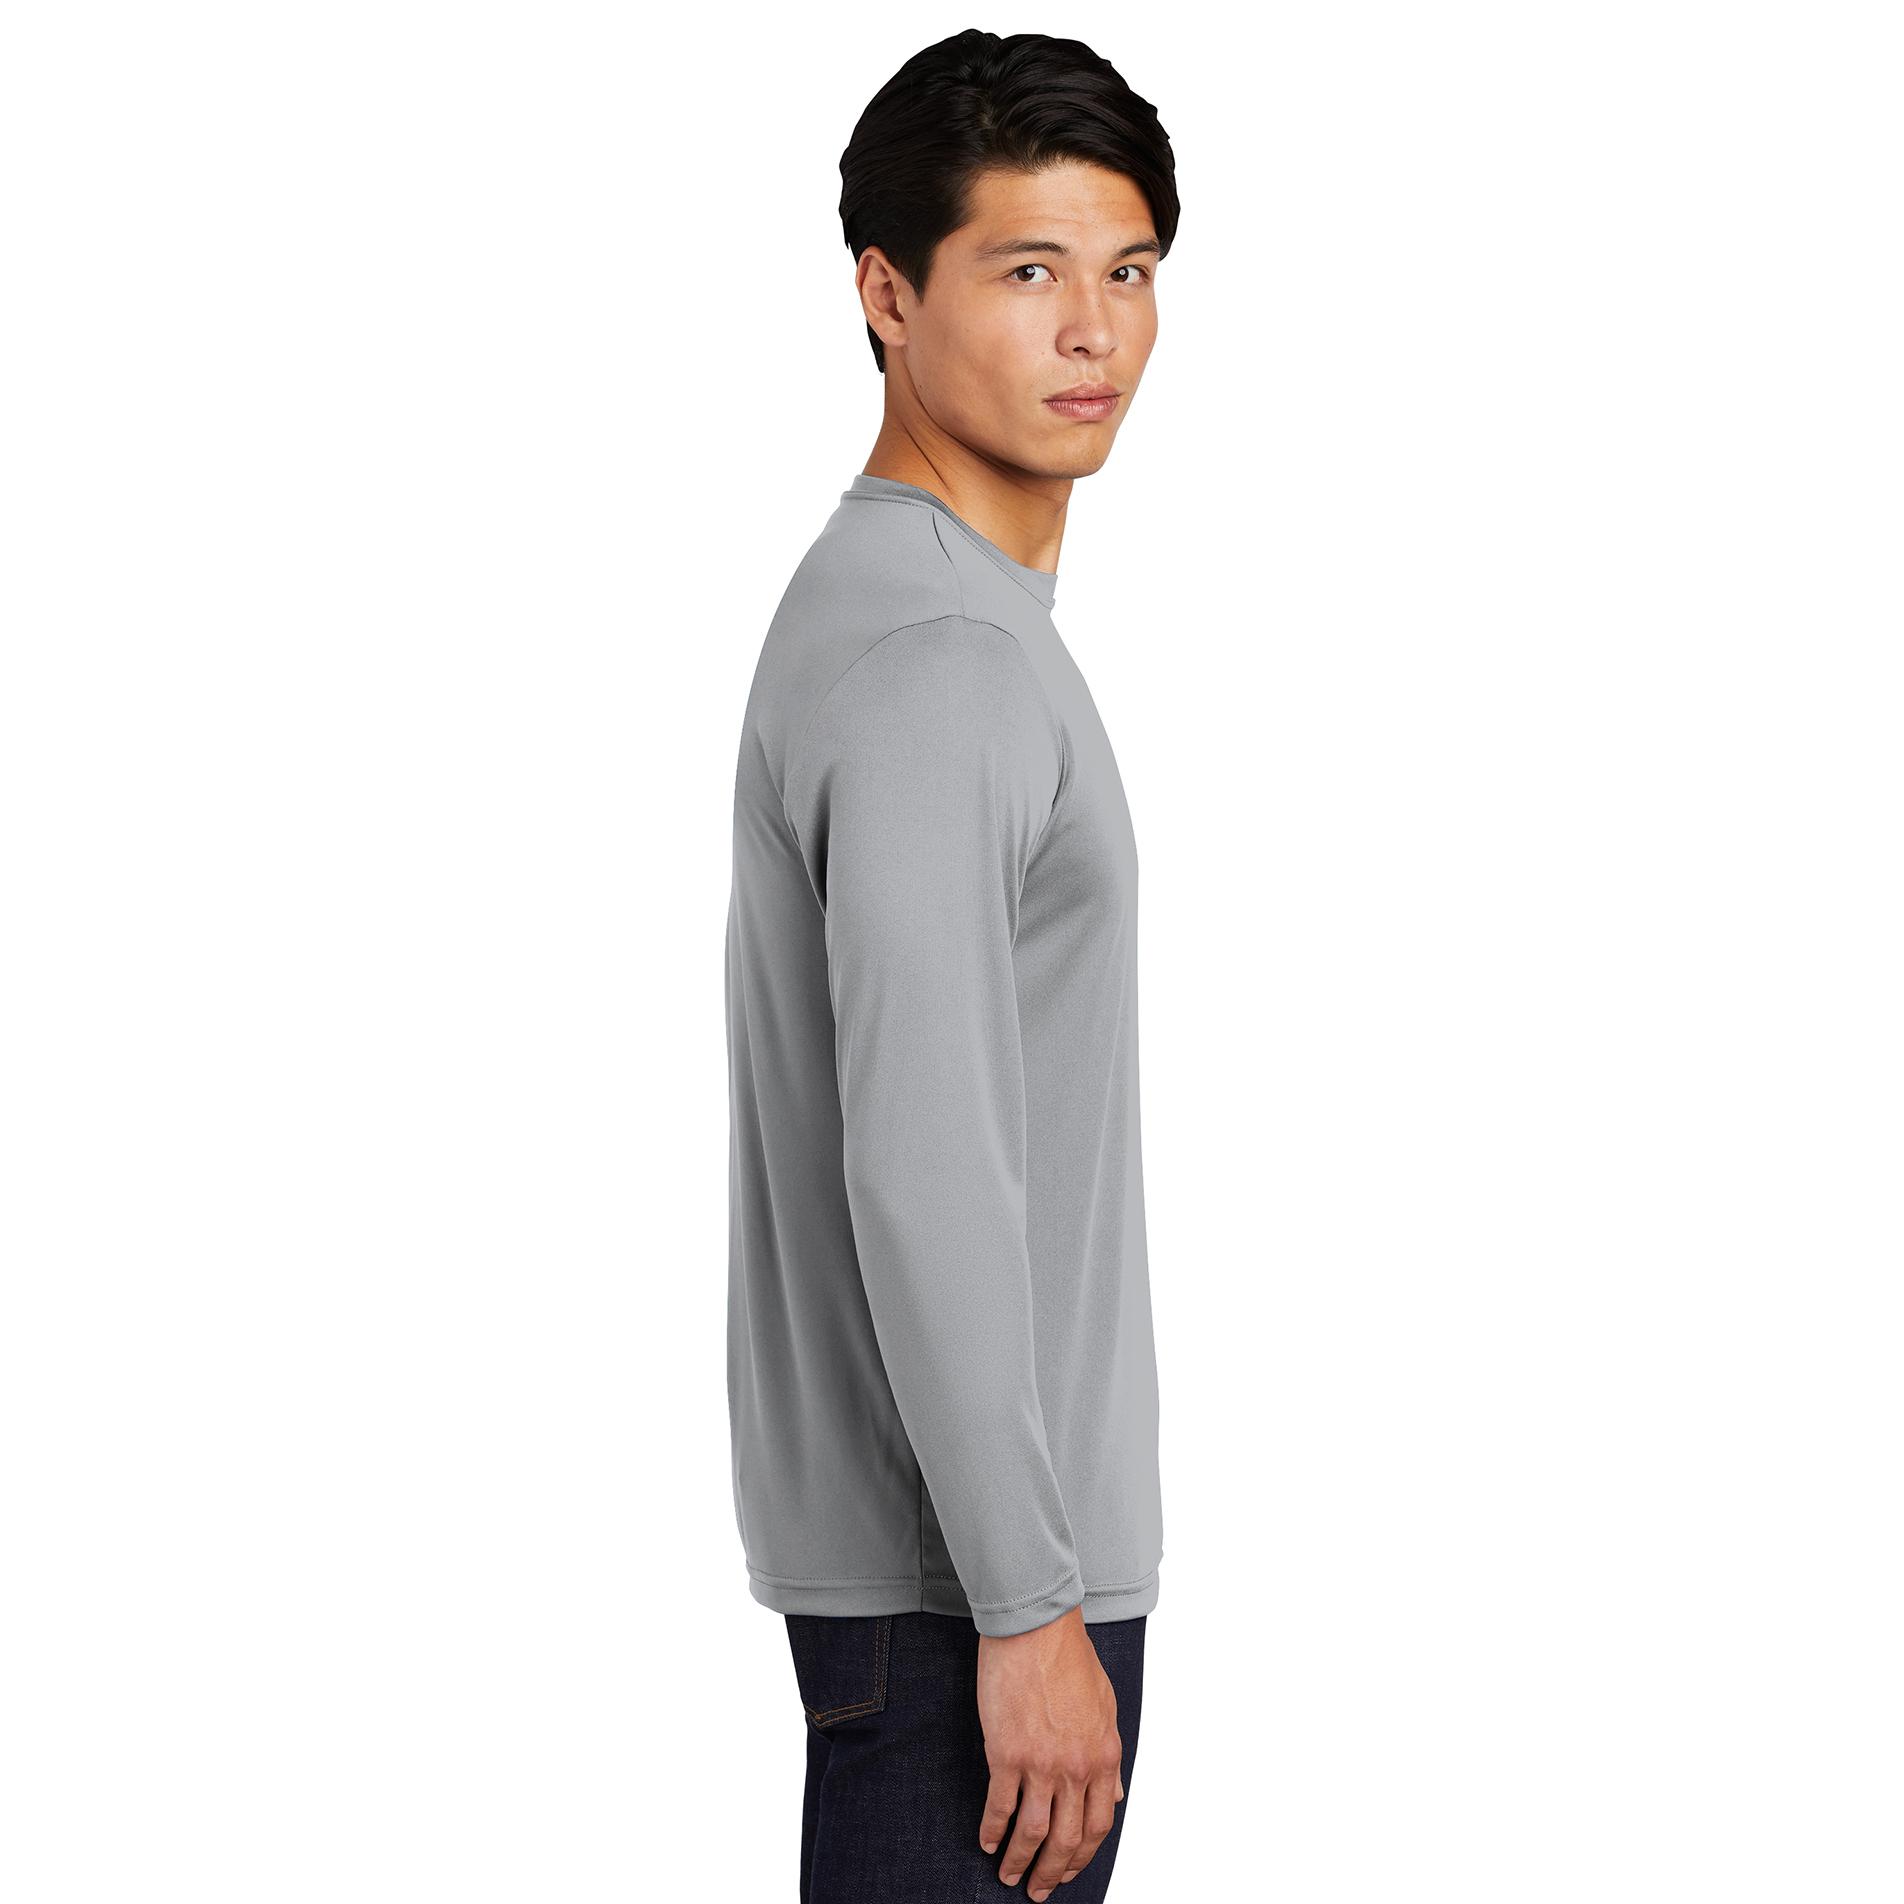 Sport-Tek ST350LS Long Sleeve PosiCharge Competitor Tee - Silver - S